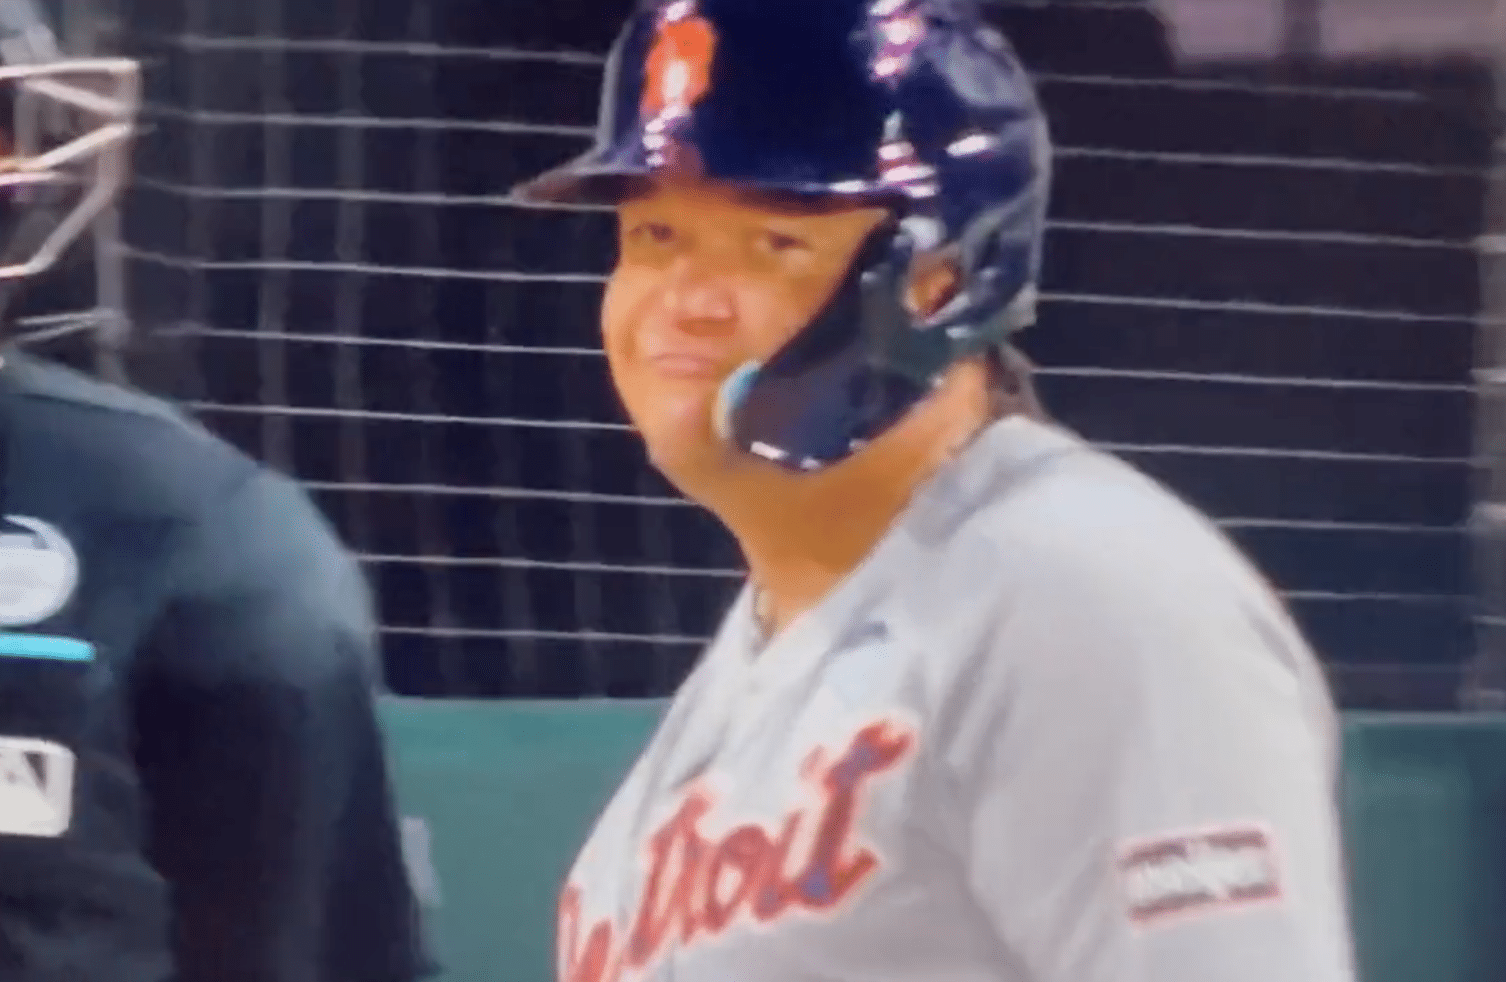 Miguel Cabrera does the Conor McGregor after nearly getting drilled by pitch [Video]